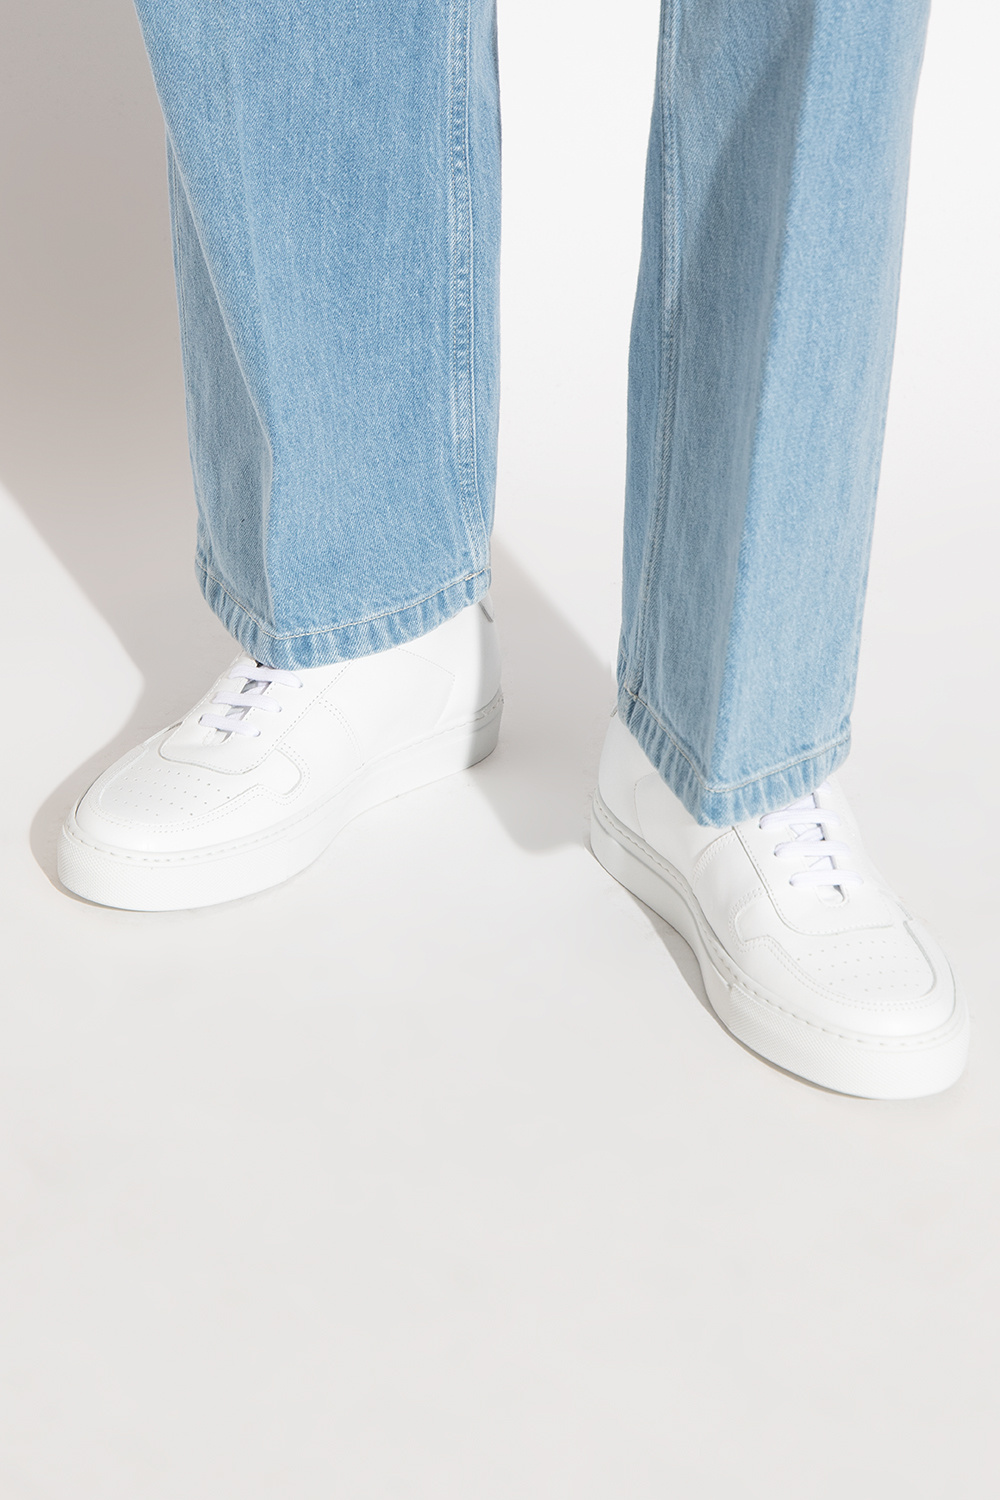 Common Projects ‘Bball Low’ sneakers | Women's Shoes | Vitkac